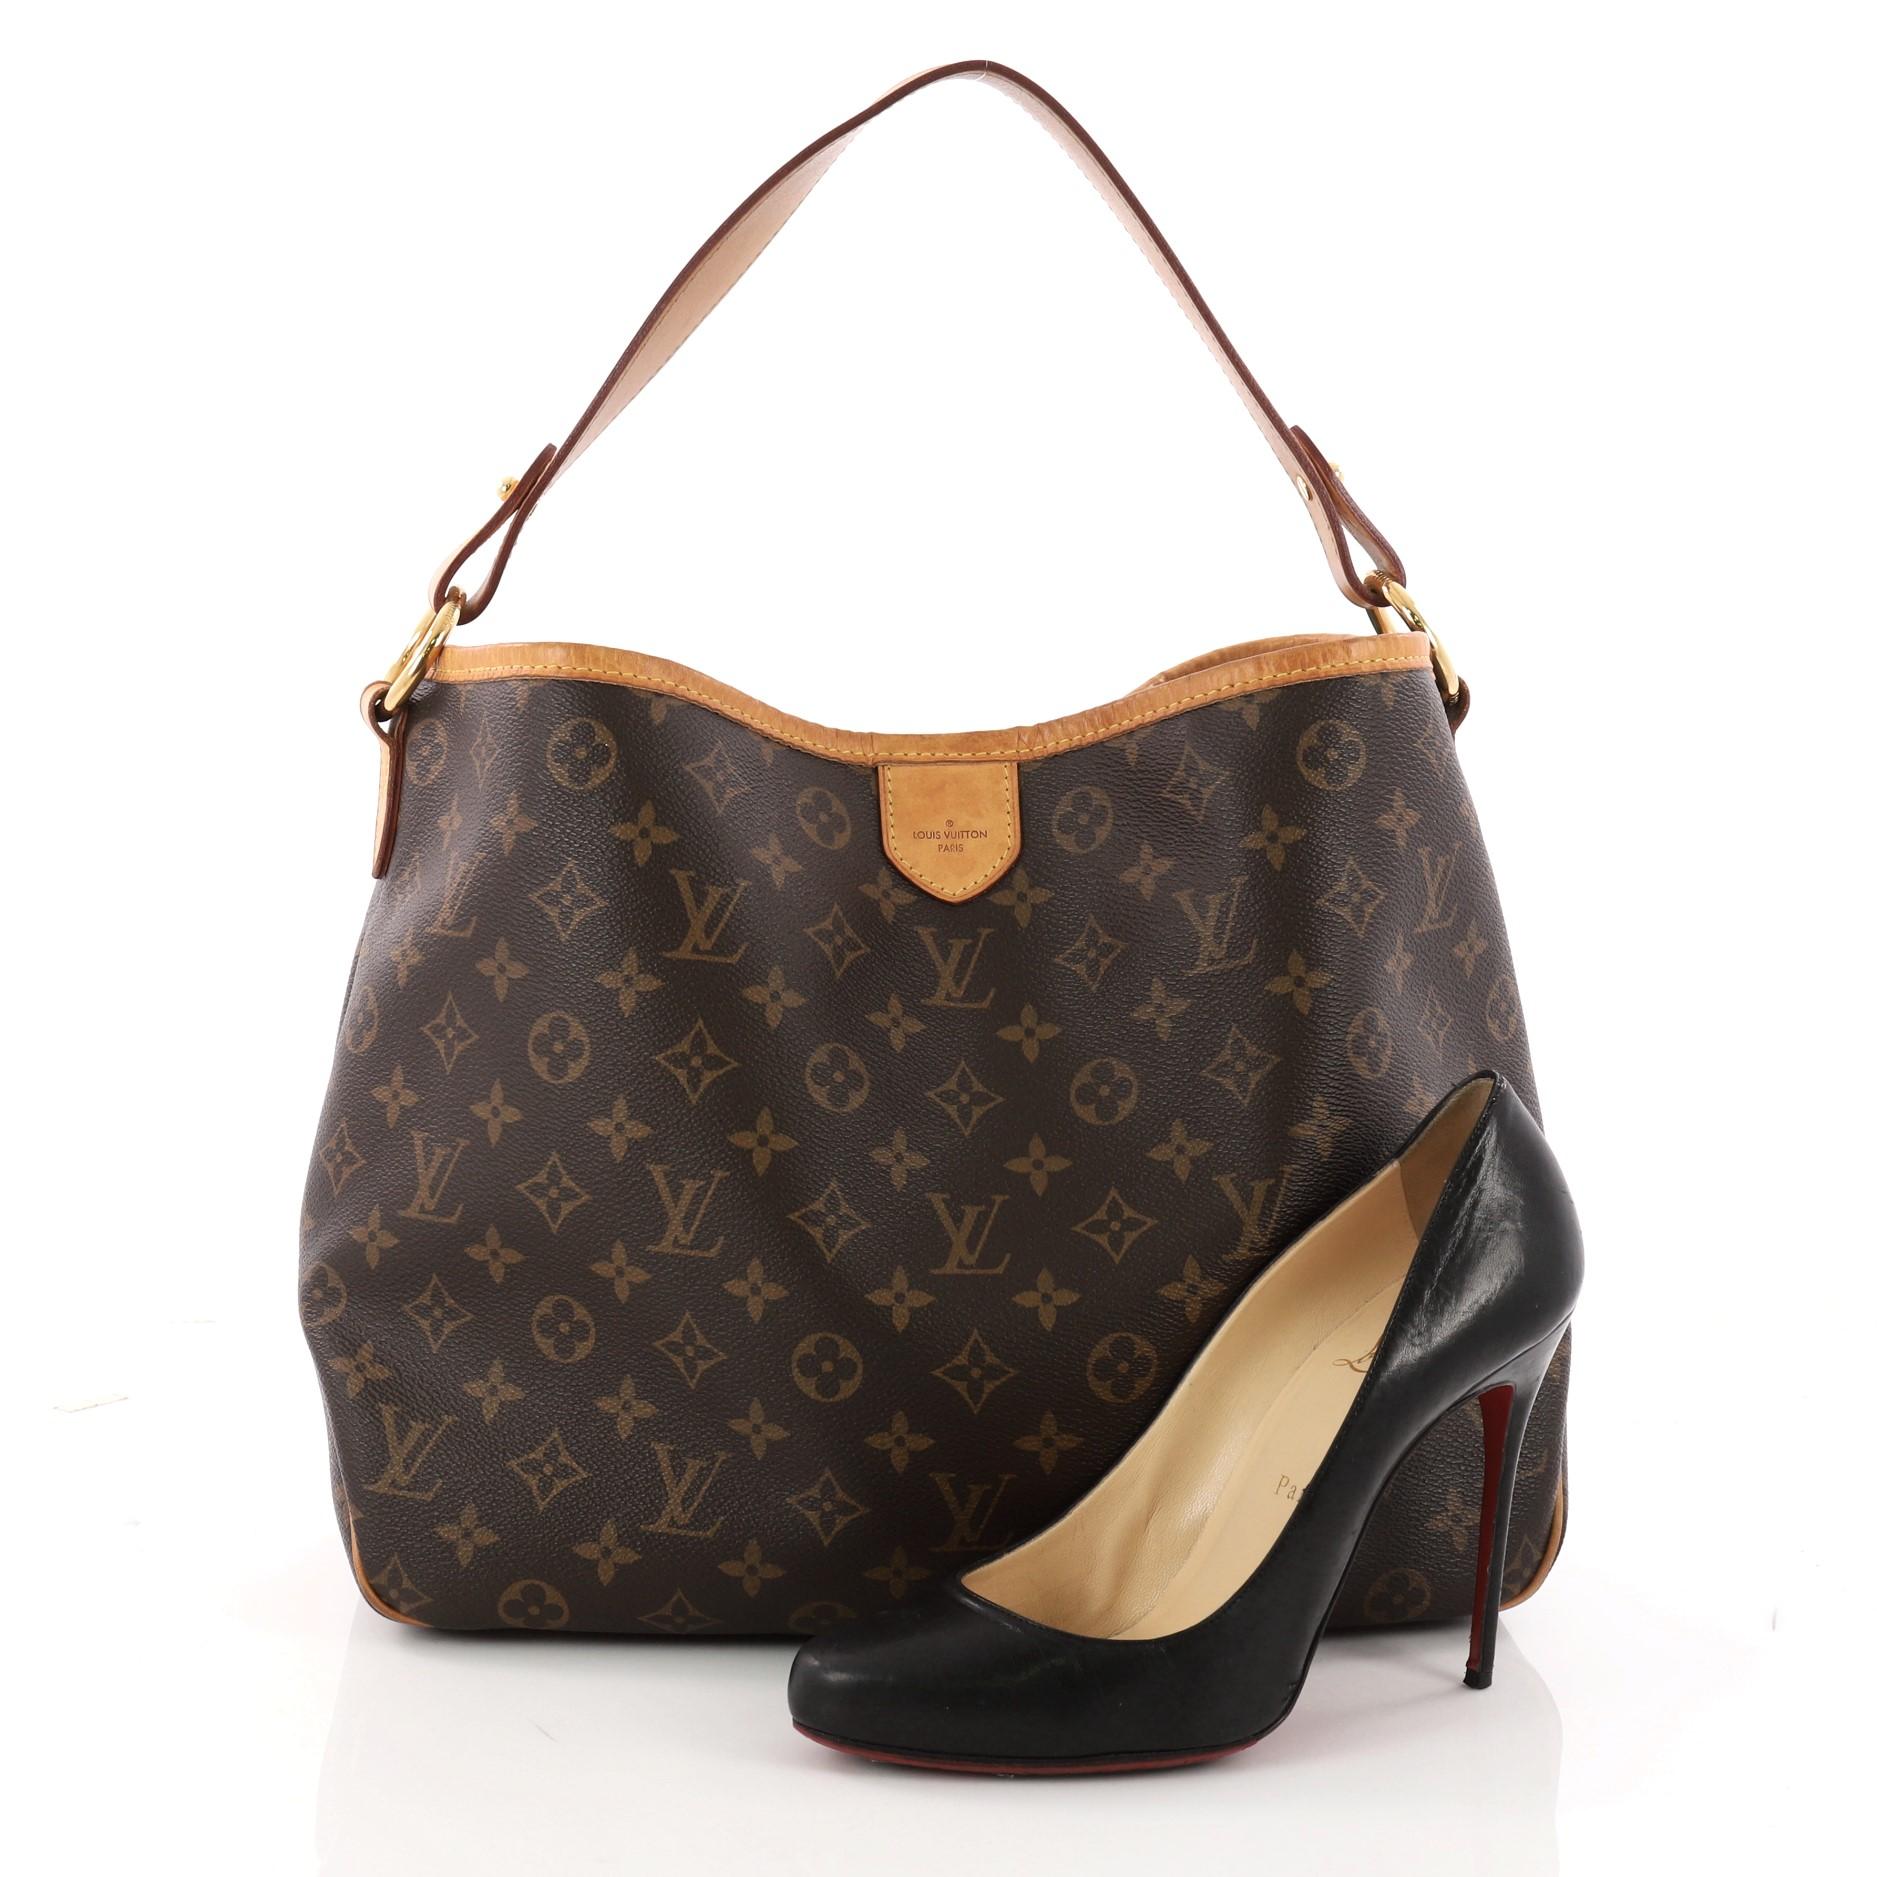 This authentic Louis Vuitton Delightful Handbag Monogram Canvas PM is a versatile hobo that can be used everyday. Constructed from the brand's classic brown monogram coated canvas with cowhide leather trims, this glamorous bag features flat leather